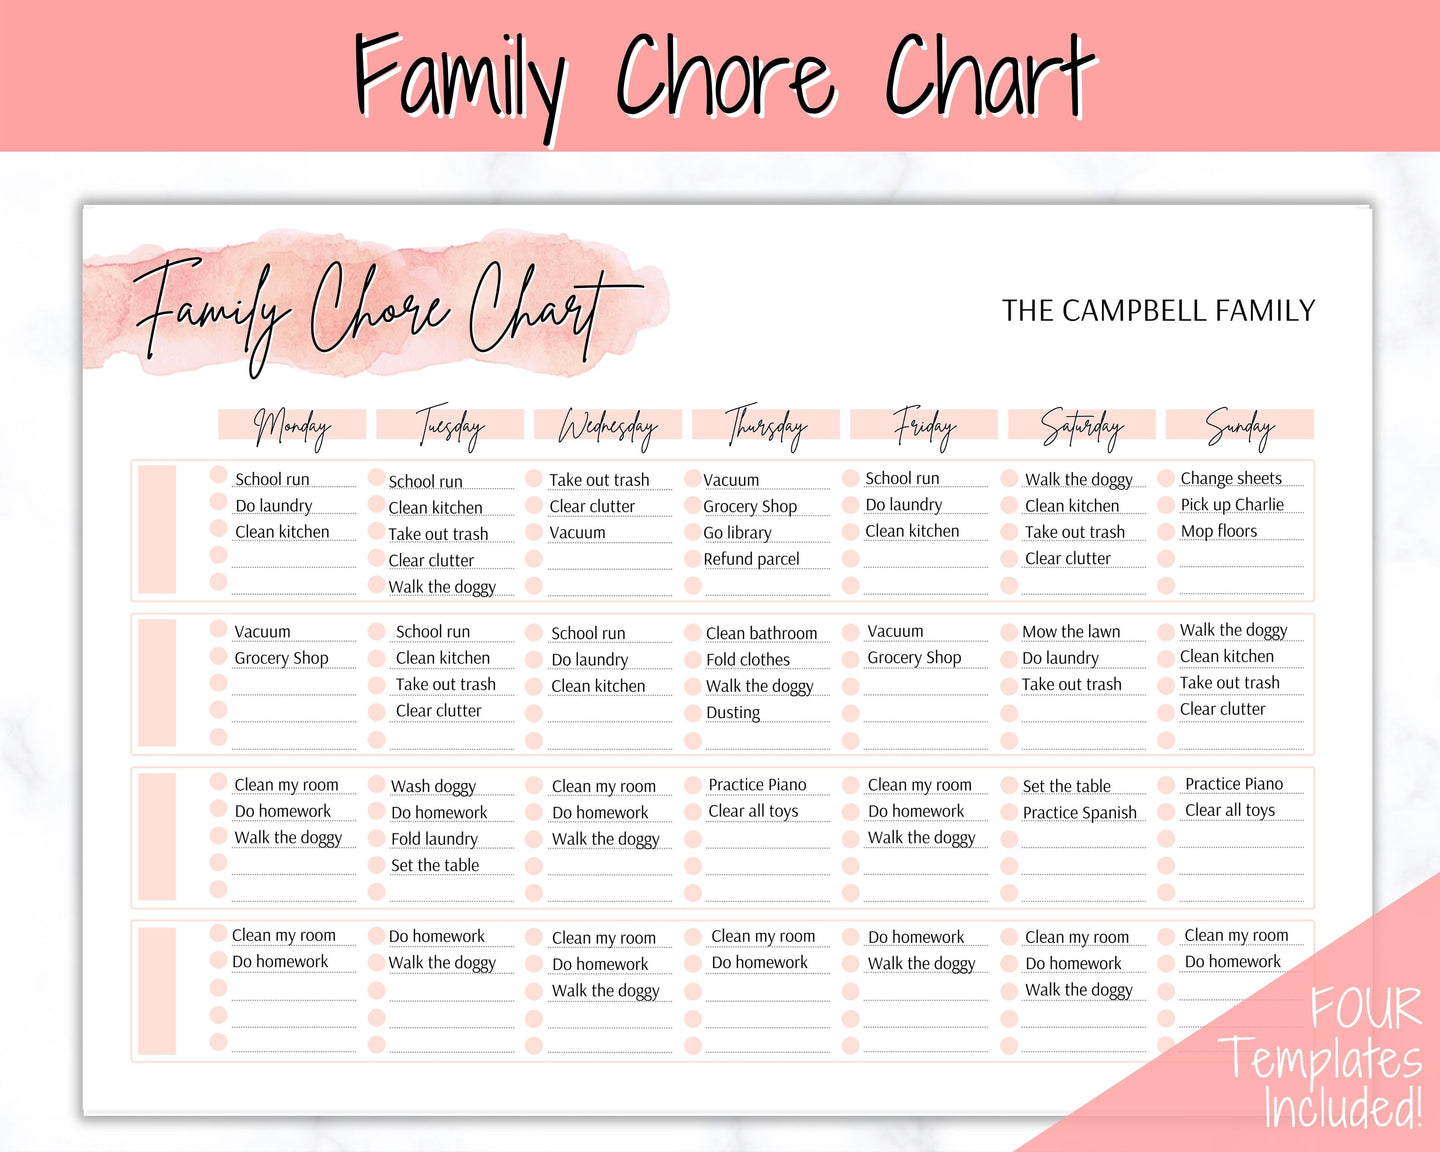 Family Chore Chart, Editable Family Planner Printable, Weekly Family Schedule, Family Calendar, Command Center, Weekly Household, Kids Adult - Pink